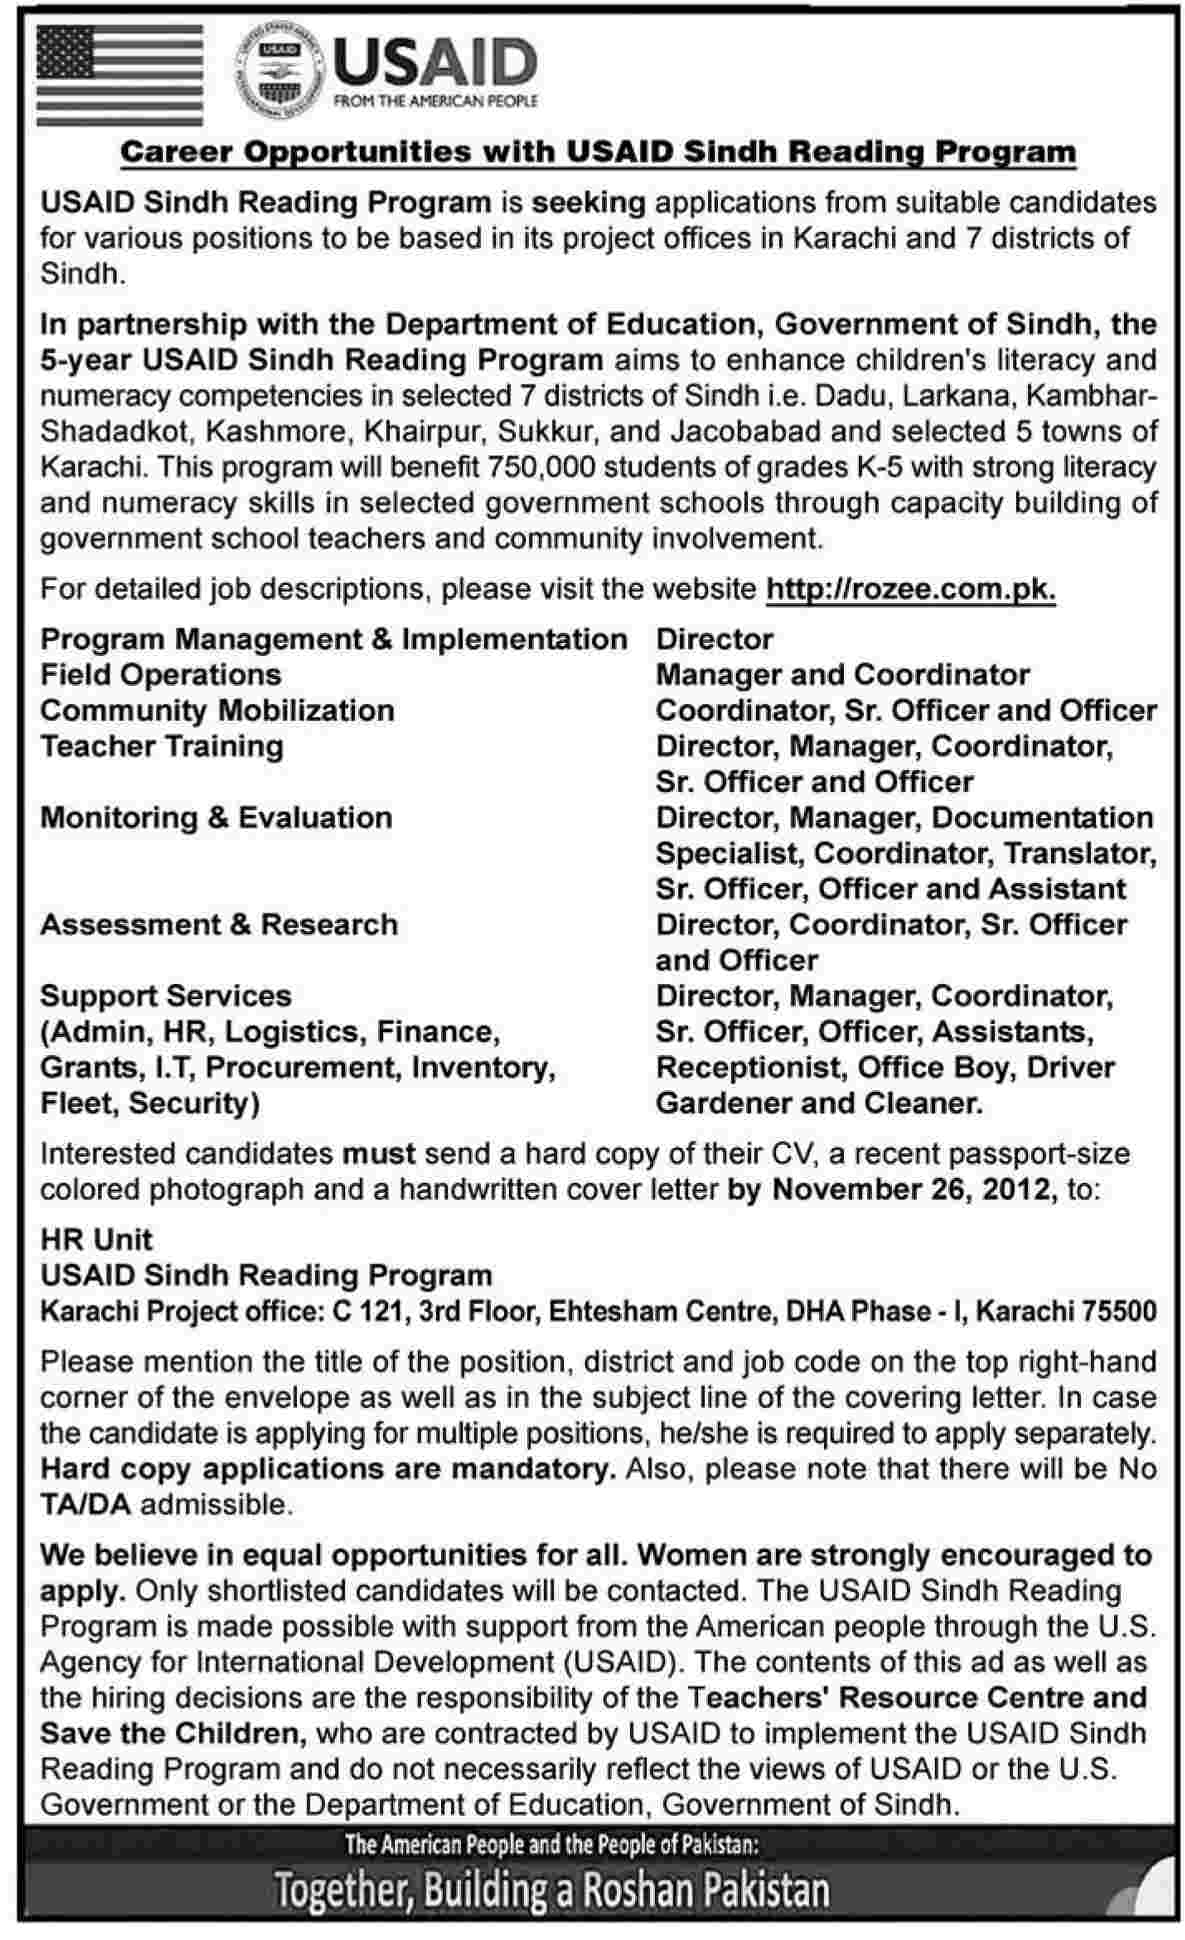 Jobs in USAID Sindh Reading Program 2012